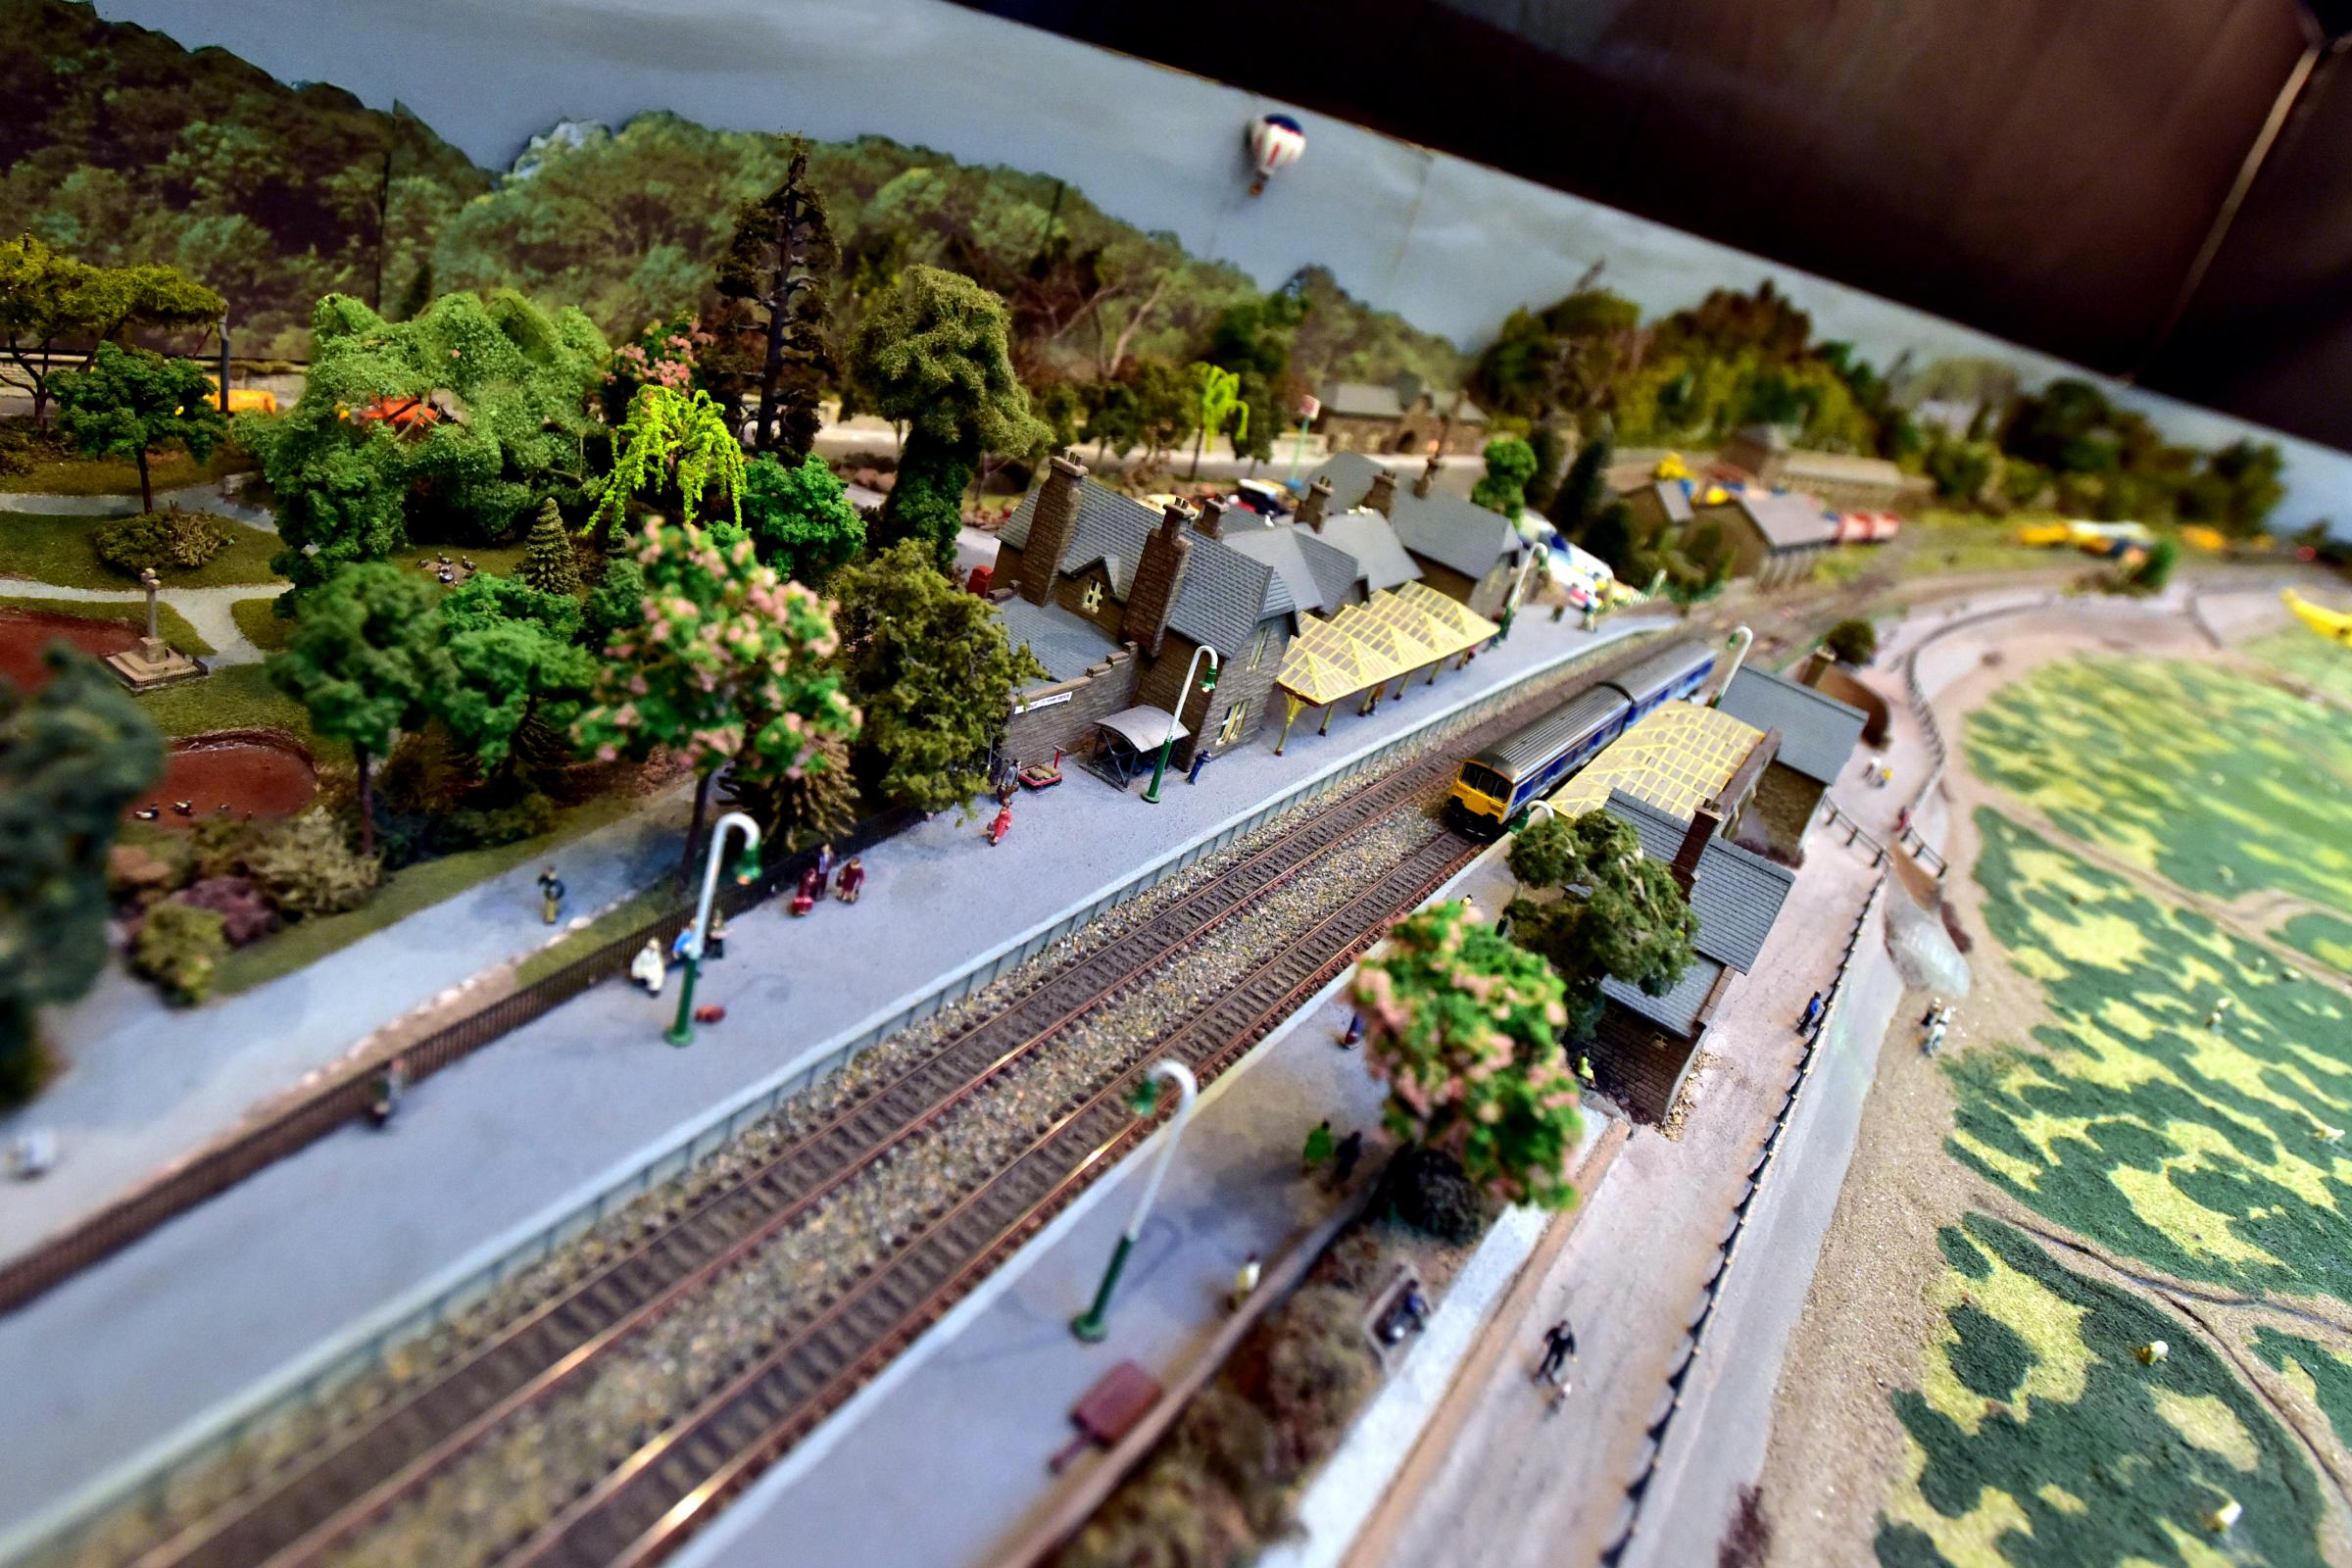 PICTURES: Blackburn and East Lancashire Model Railway Society exhibition